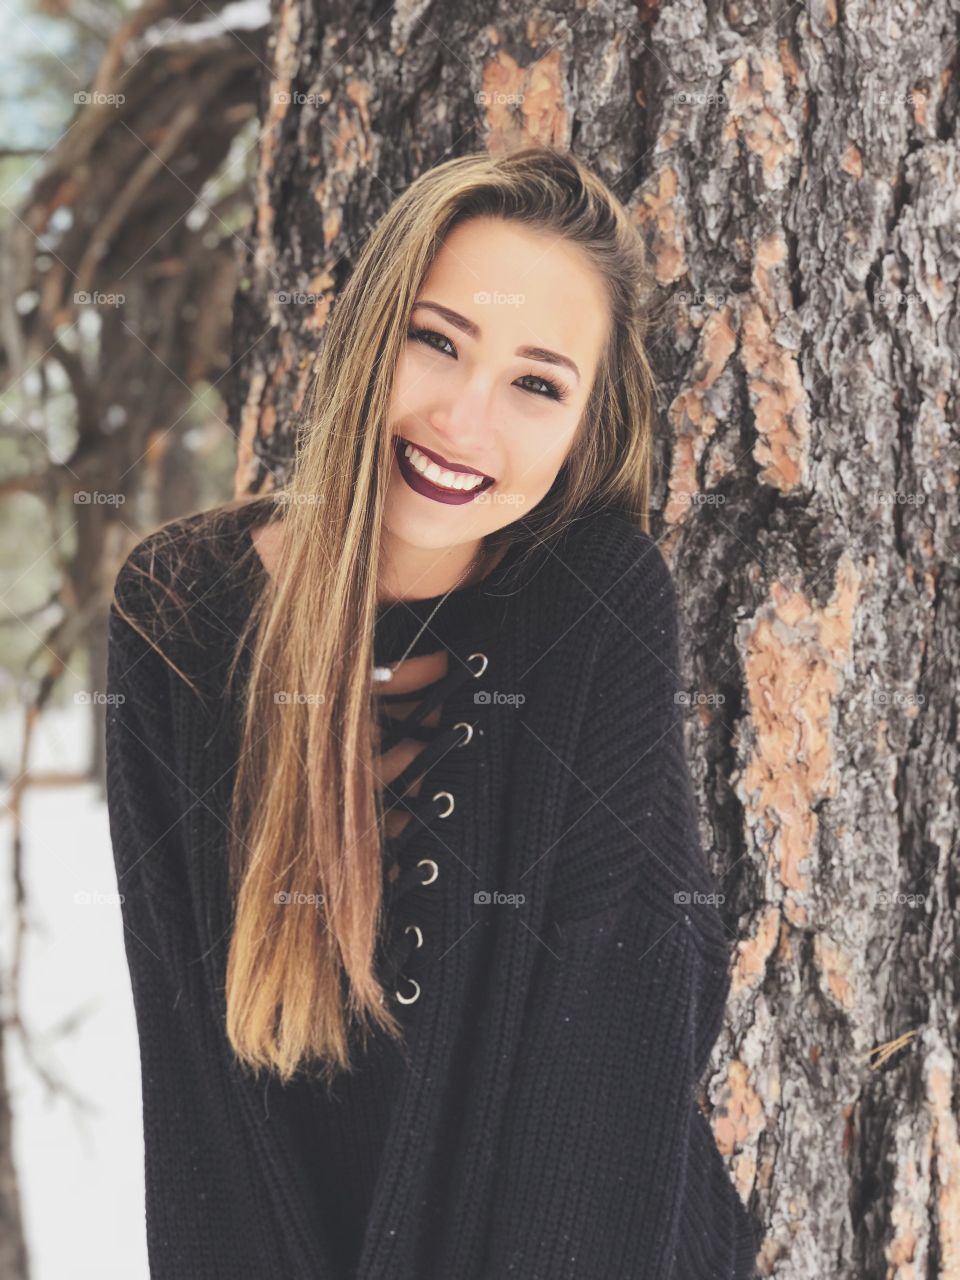 Young beauty enjoying the snowy season in the mountains of northern Arizona.